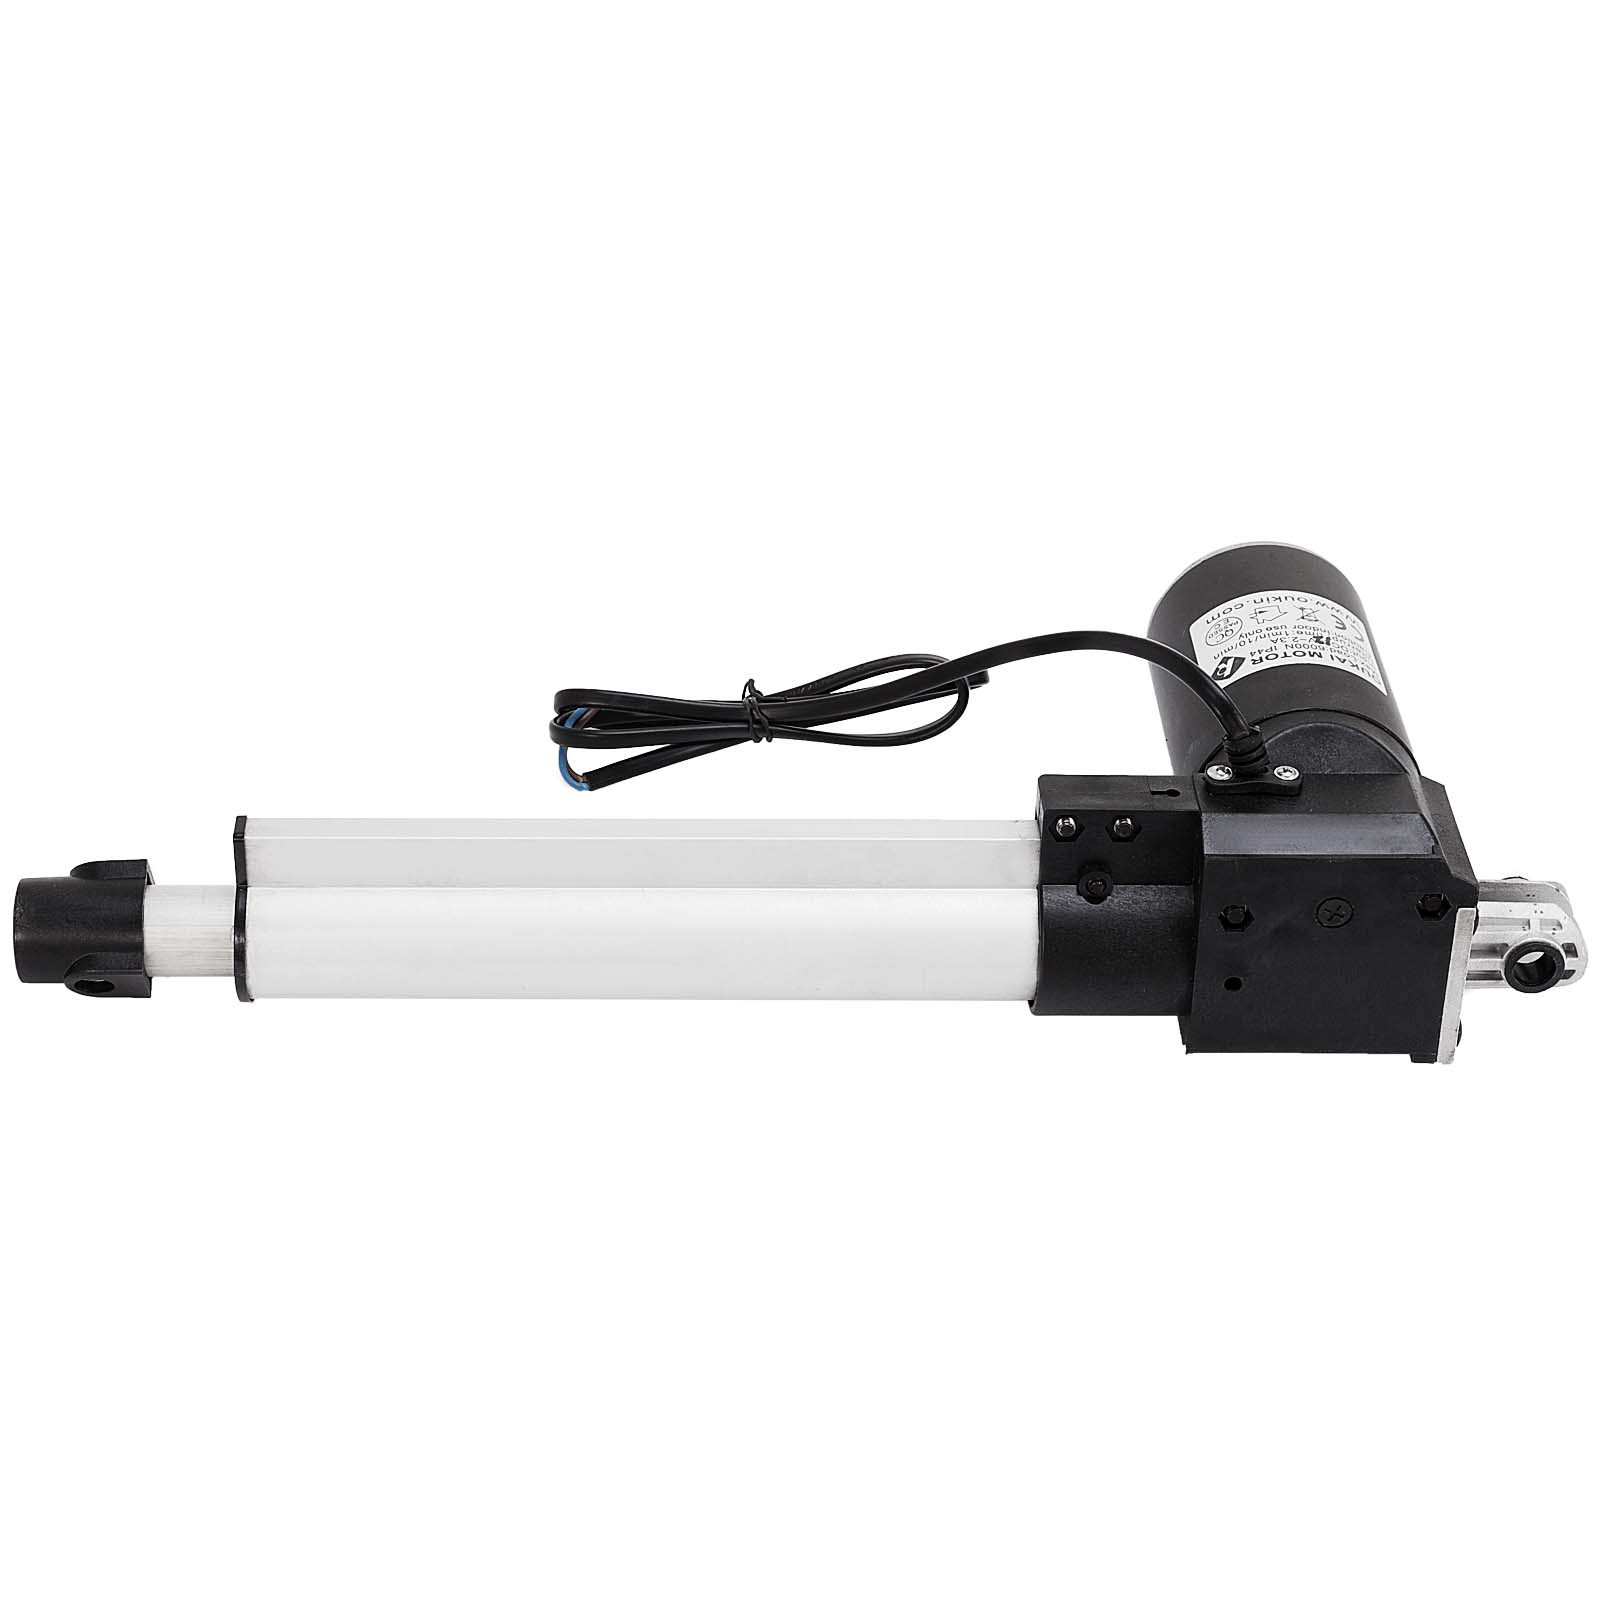 8" 6000N Electric Linear Actuator 1320 Pound Max Lift Heavy Duty 12V DC Motor 